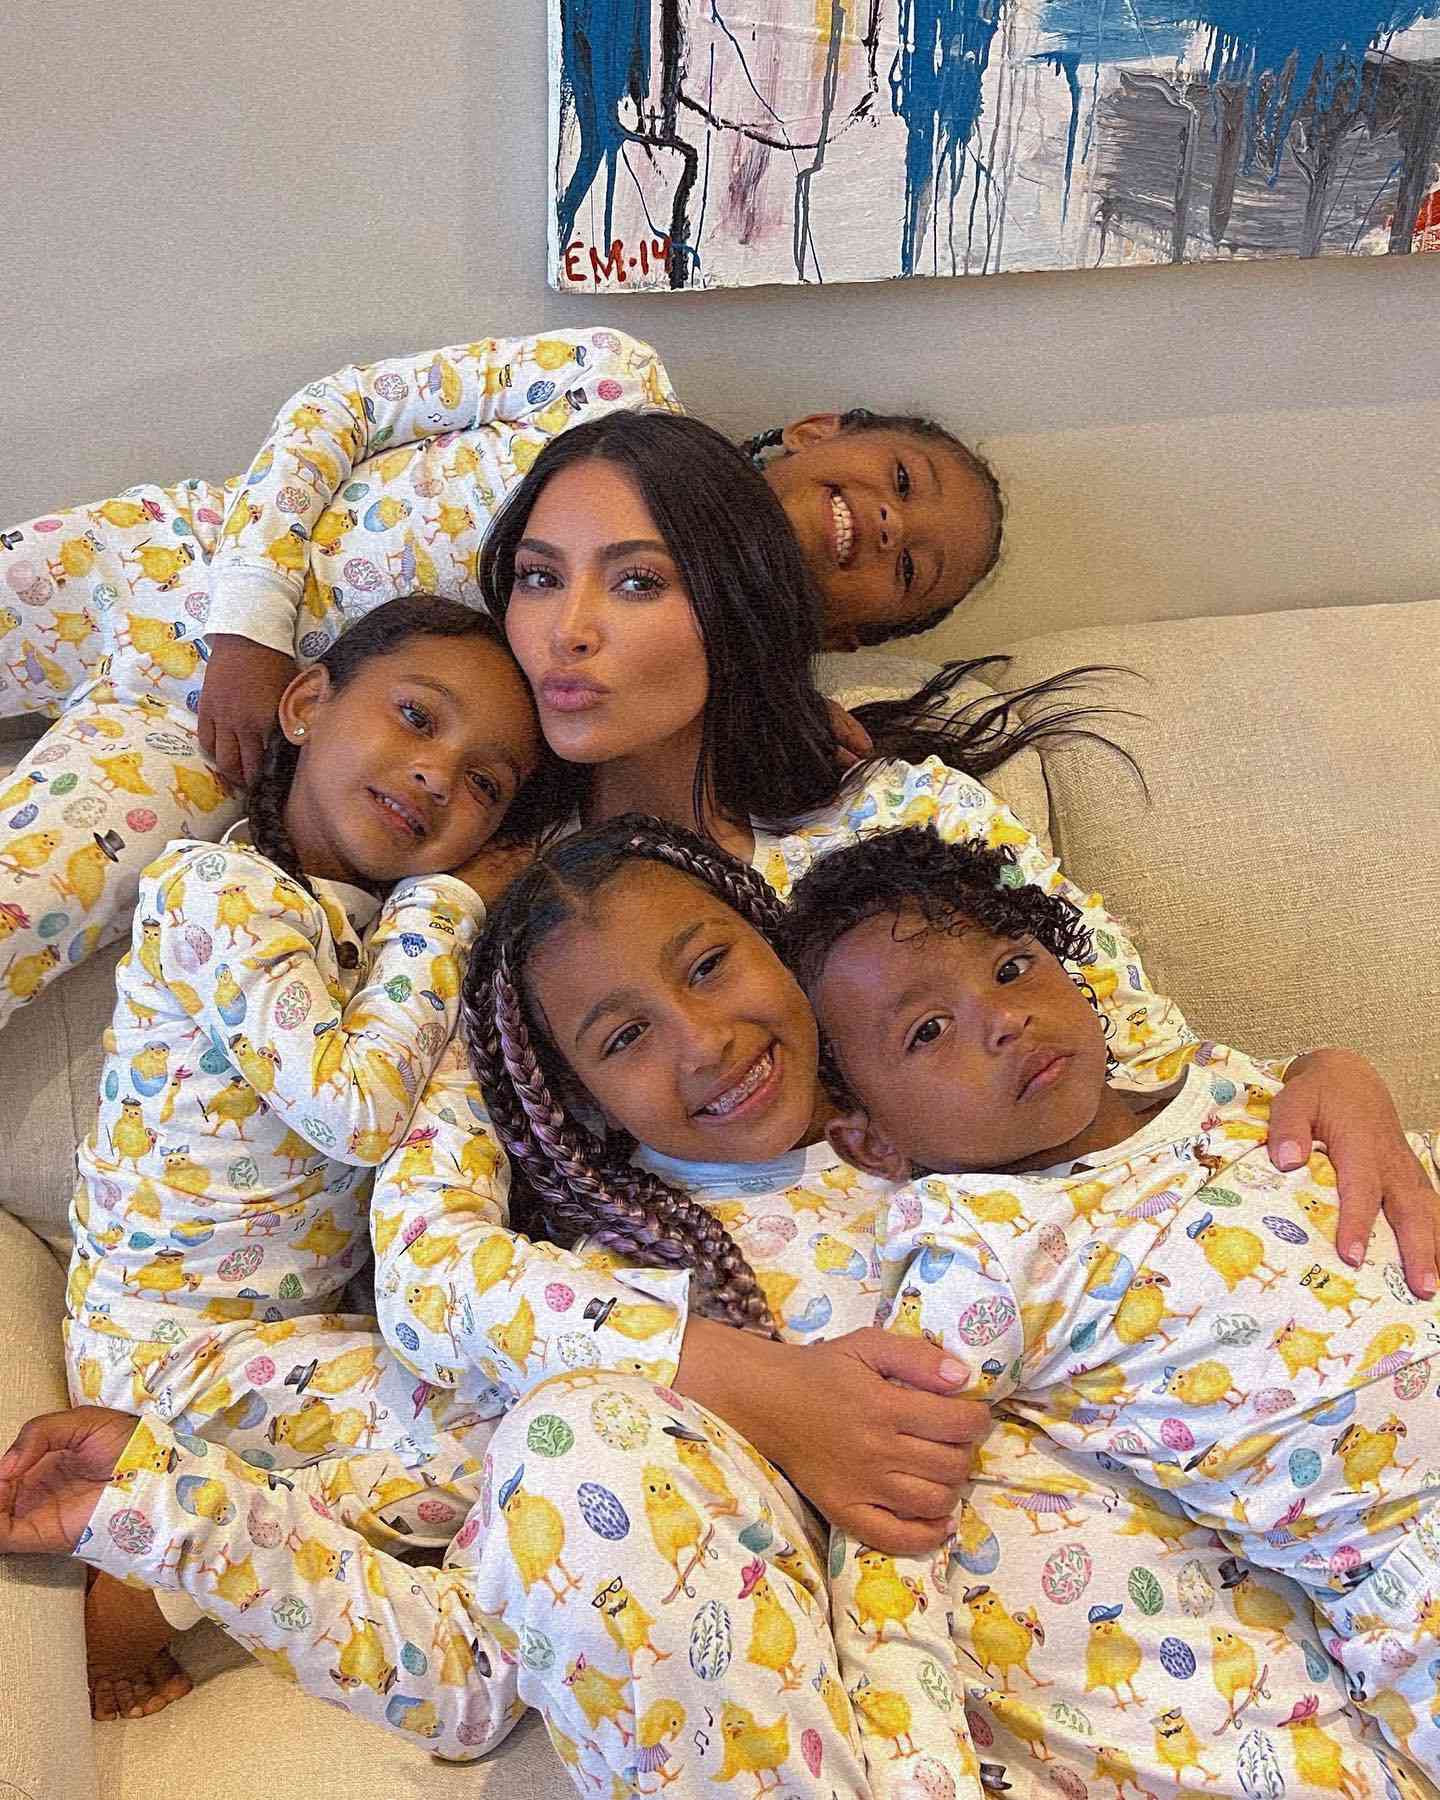 likhoa kim kardashian shares her principles of raising children and helping them grow up healthy and strong over the past years 6551f22f2bed5 Kim Kardashian Shares Her Principles Of Raising Children And Helping Them Grow Up Healthy And Strong Over The Past 15 Years.